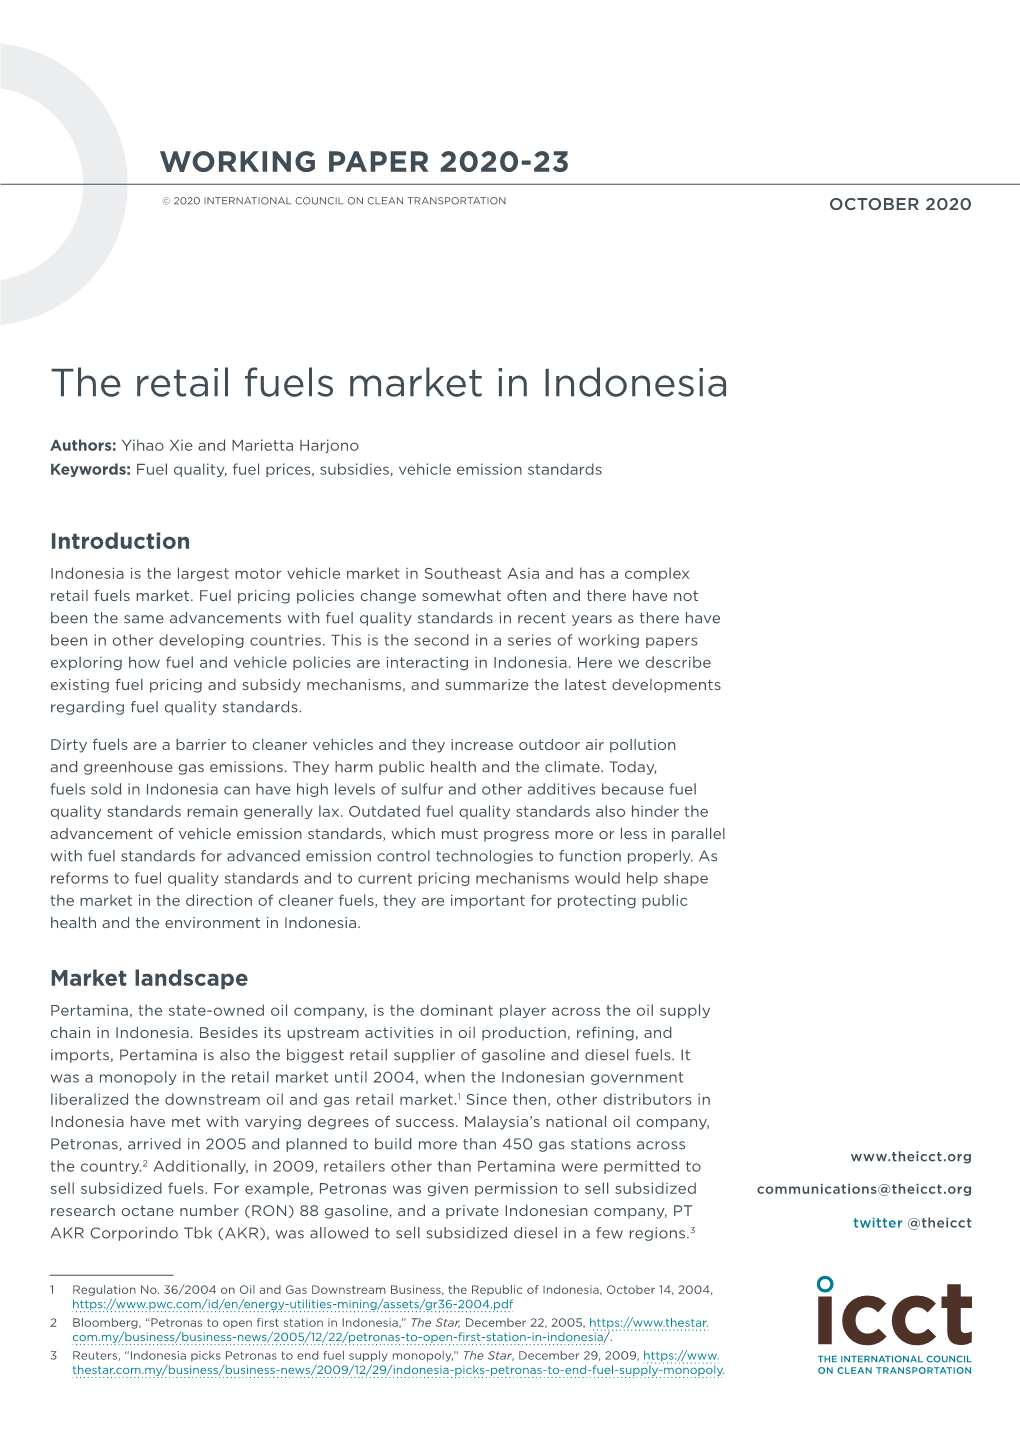 The Retail Fuels Market in Indonesia